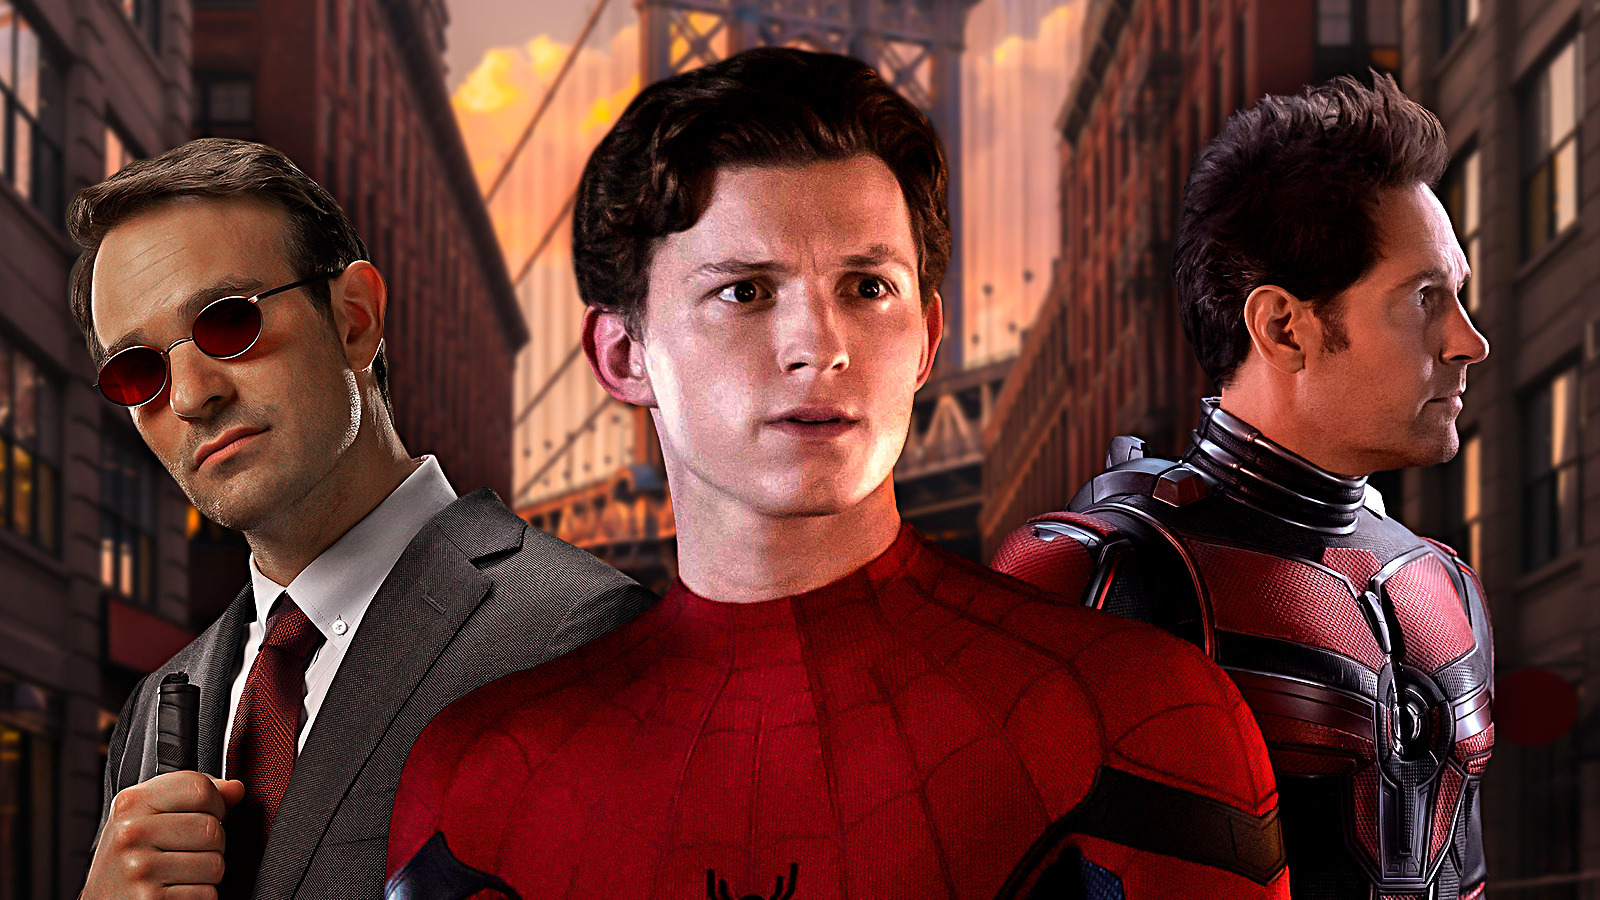 https://www.looper.com/img/gallery/tom-hollands-spider-man-4-may-feature-two-fan-favorite-marvel-heroes/l-intro-1702926963.jpg